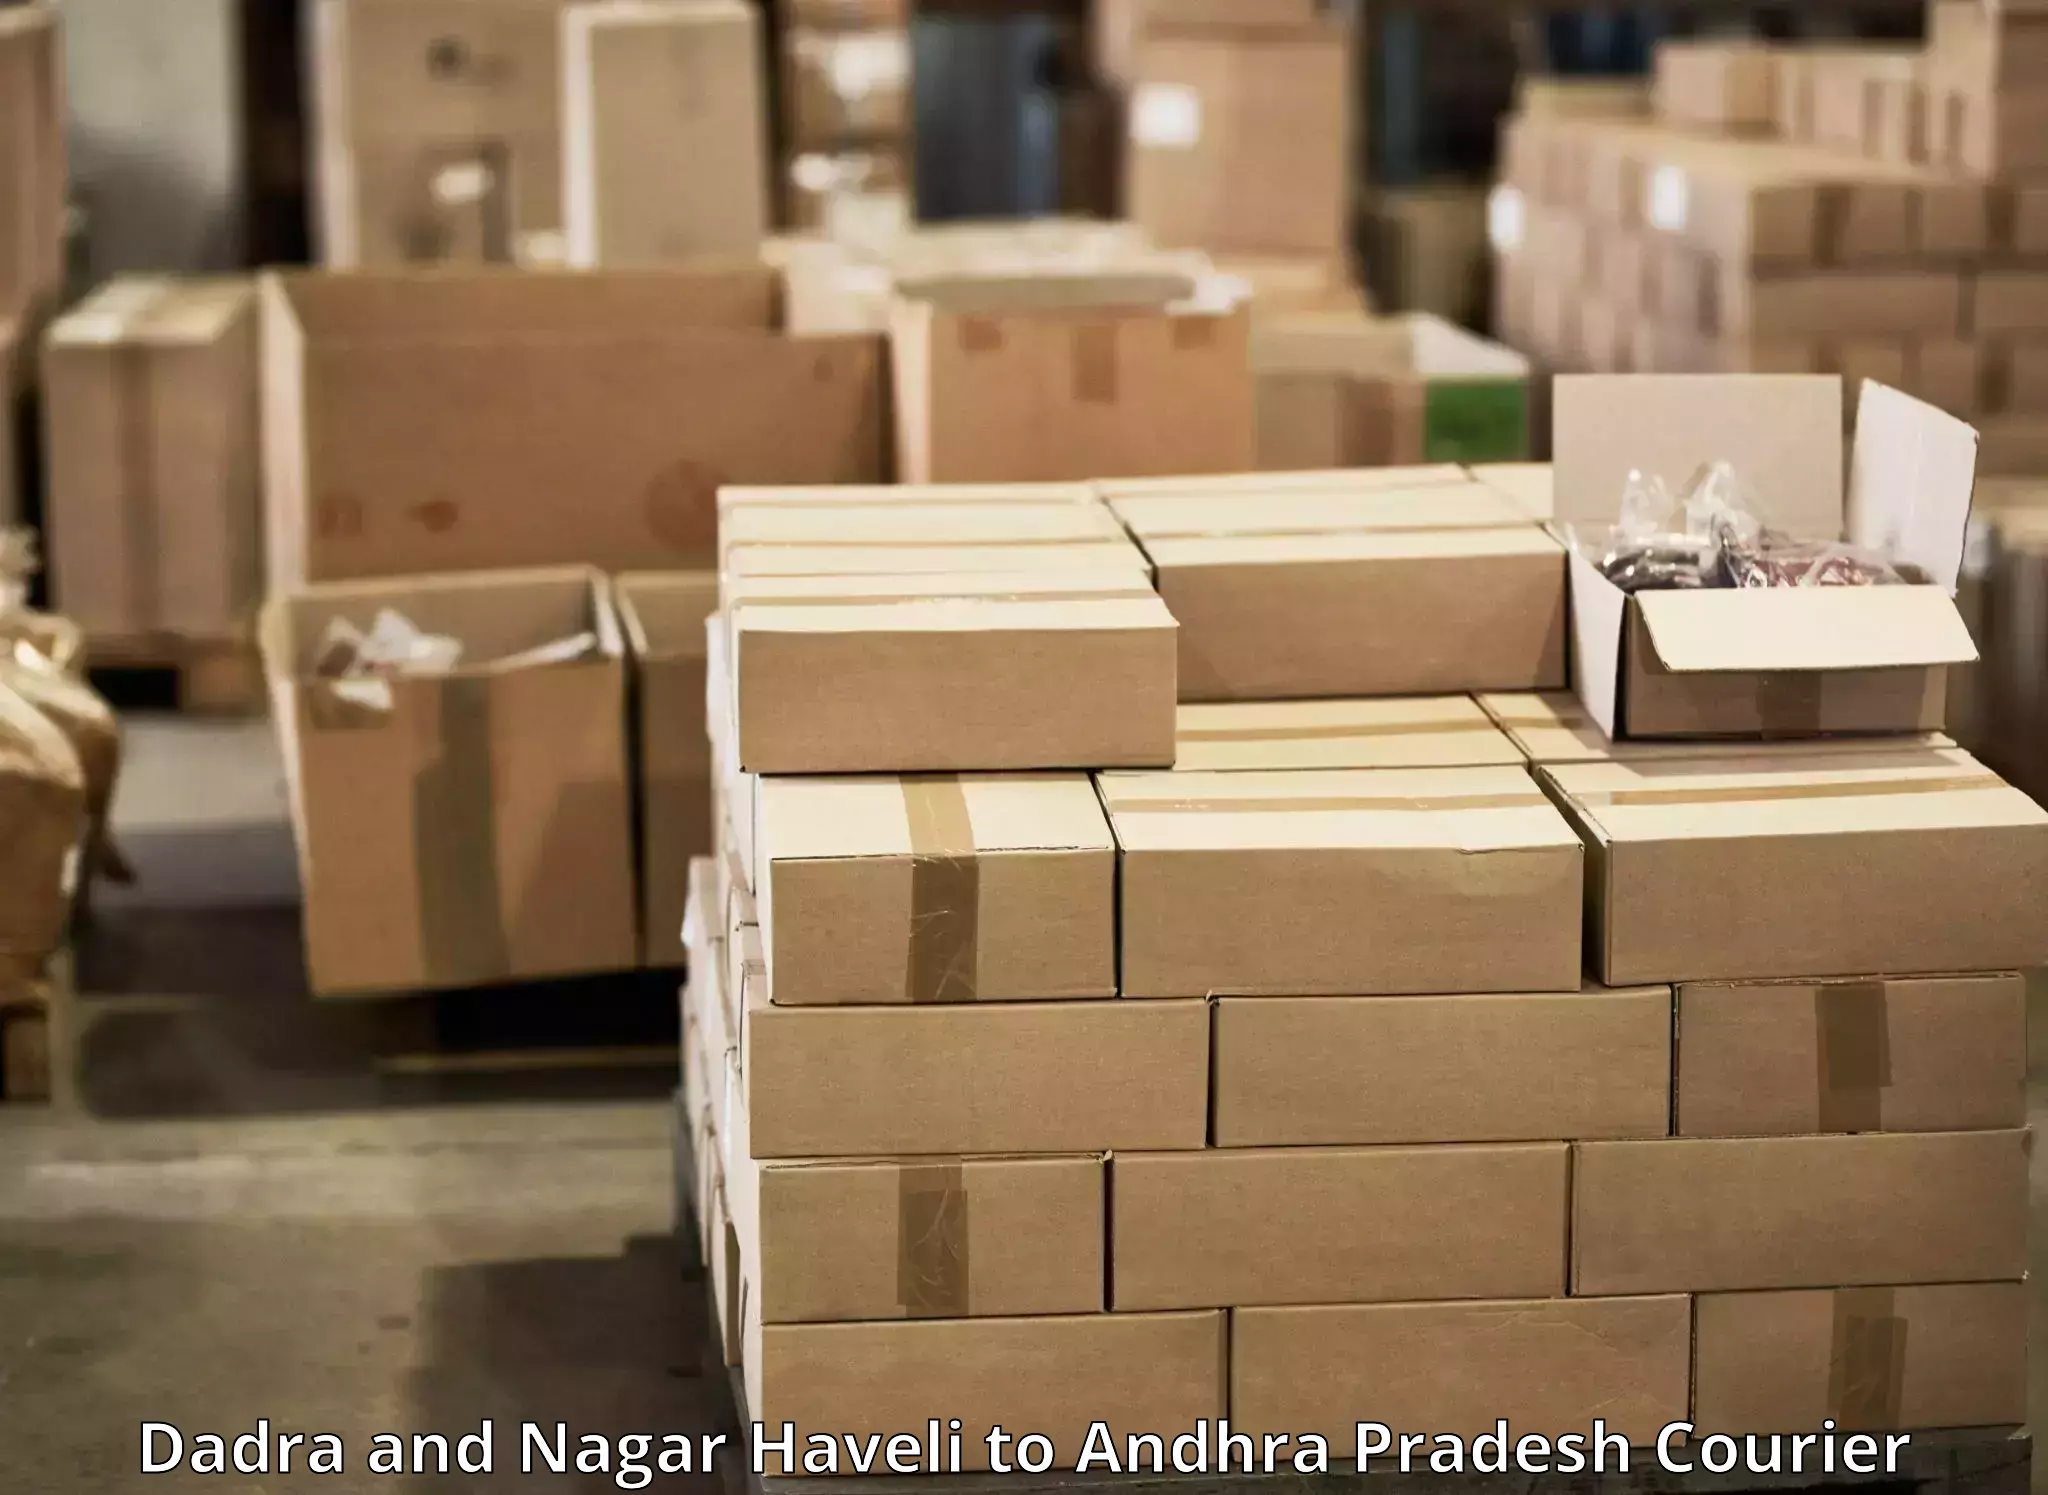 Express delivery capabilities in Dadra and Nagar Haveli to Tekkali